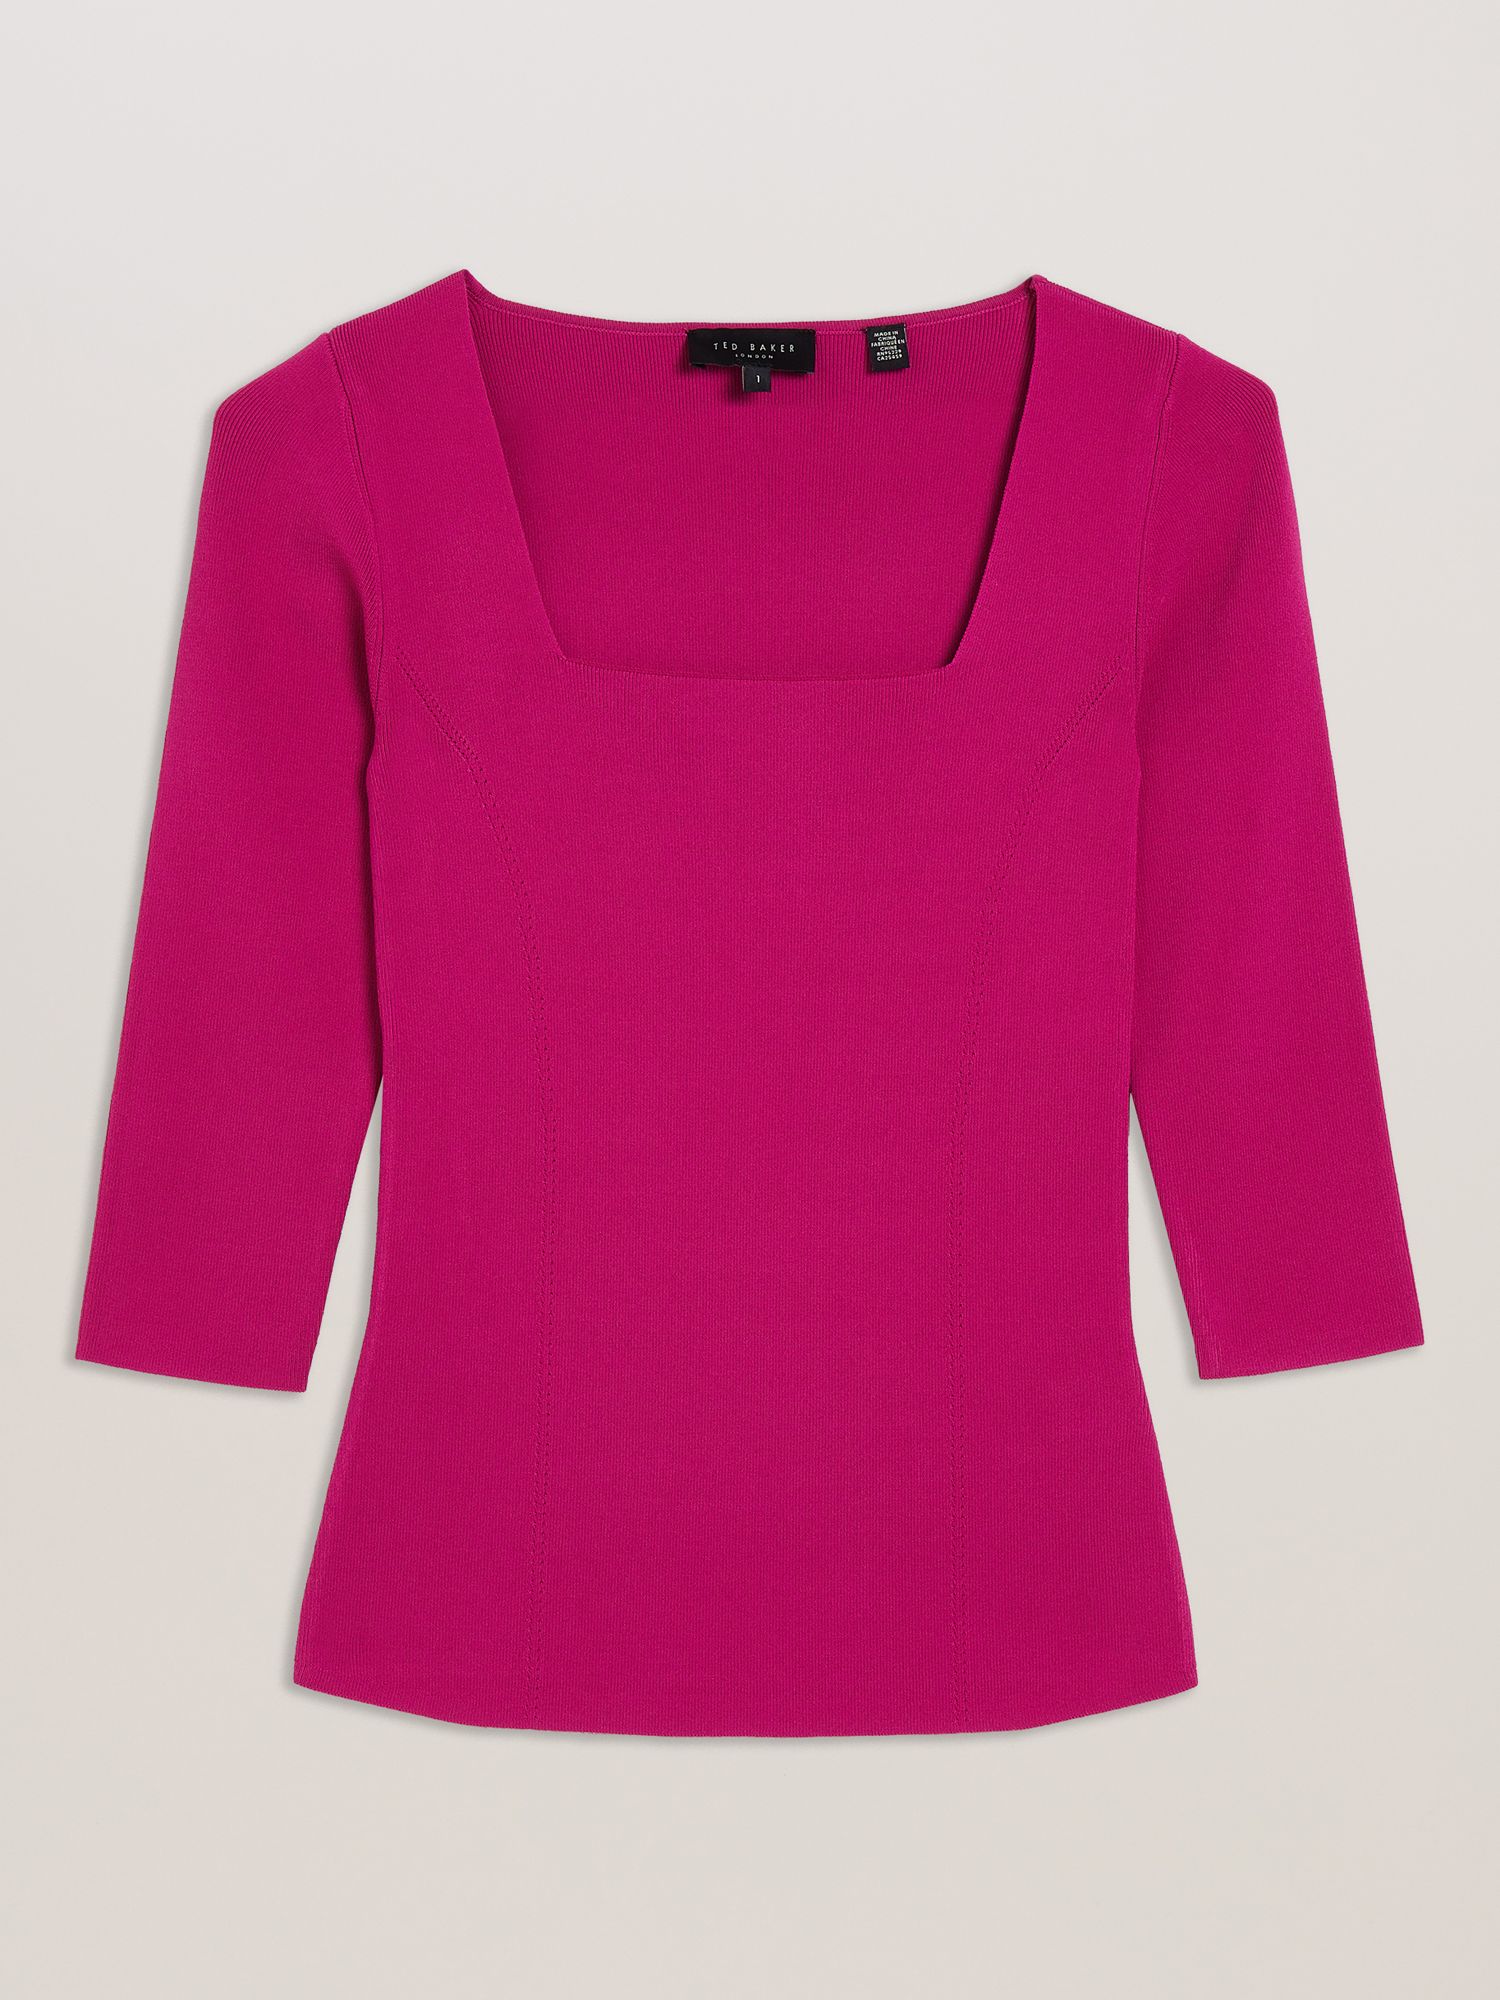 Ted Baker Vallryy Square Neck Fitted Knit Top, Pink Hot, 12